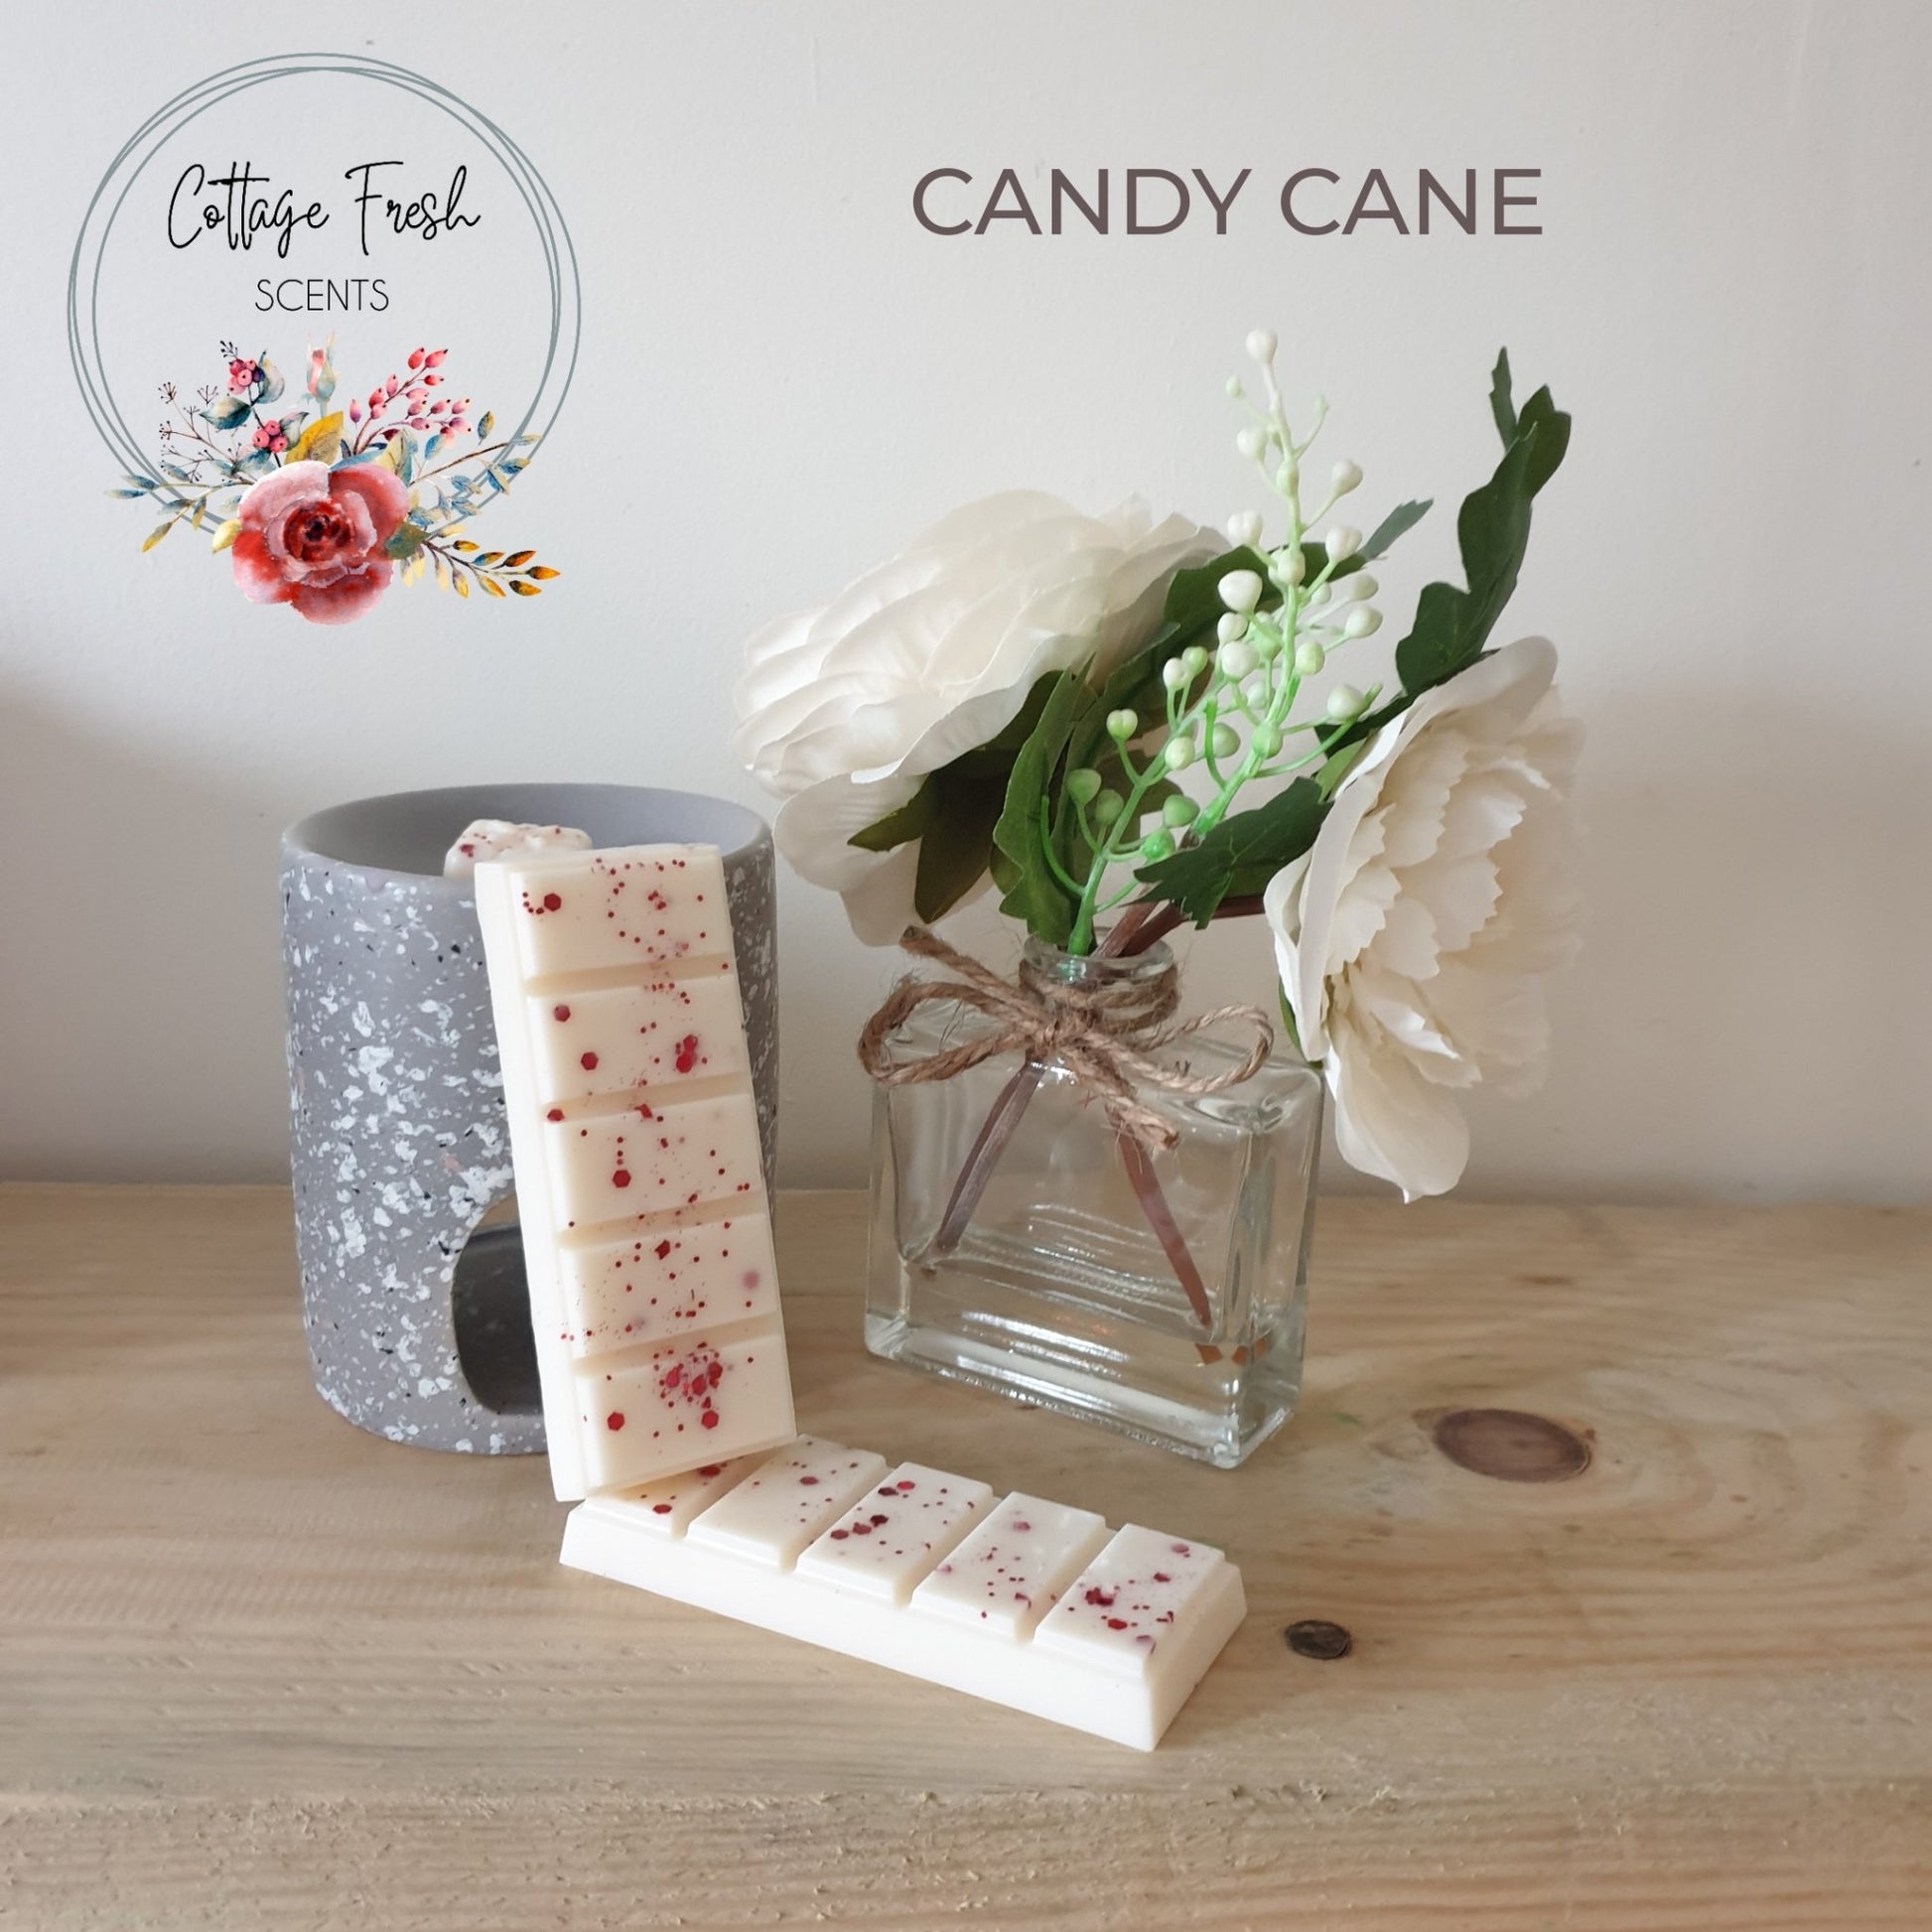 Candy Cane Wax Melt - Cottage Fresh Scents